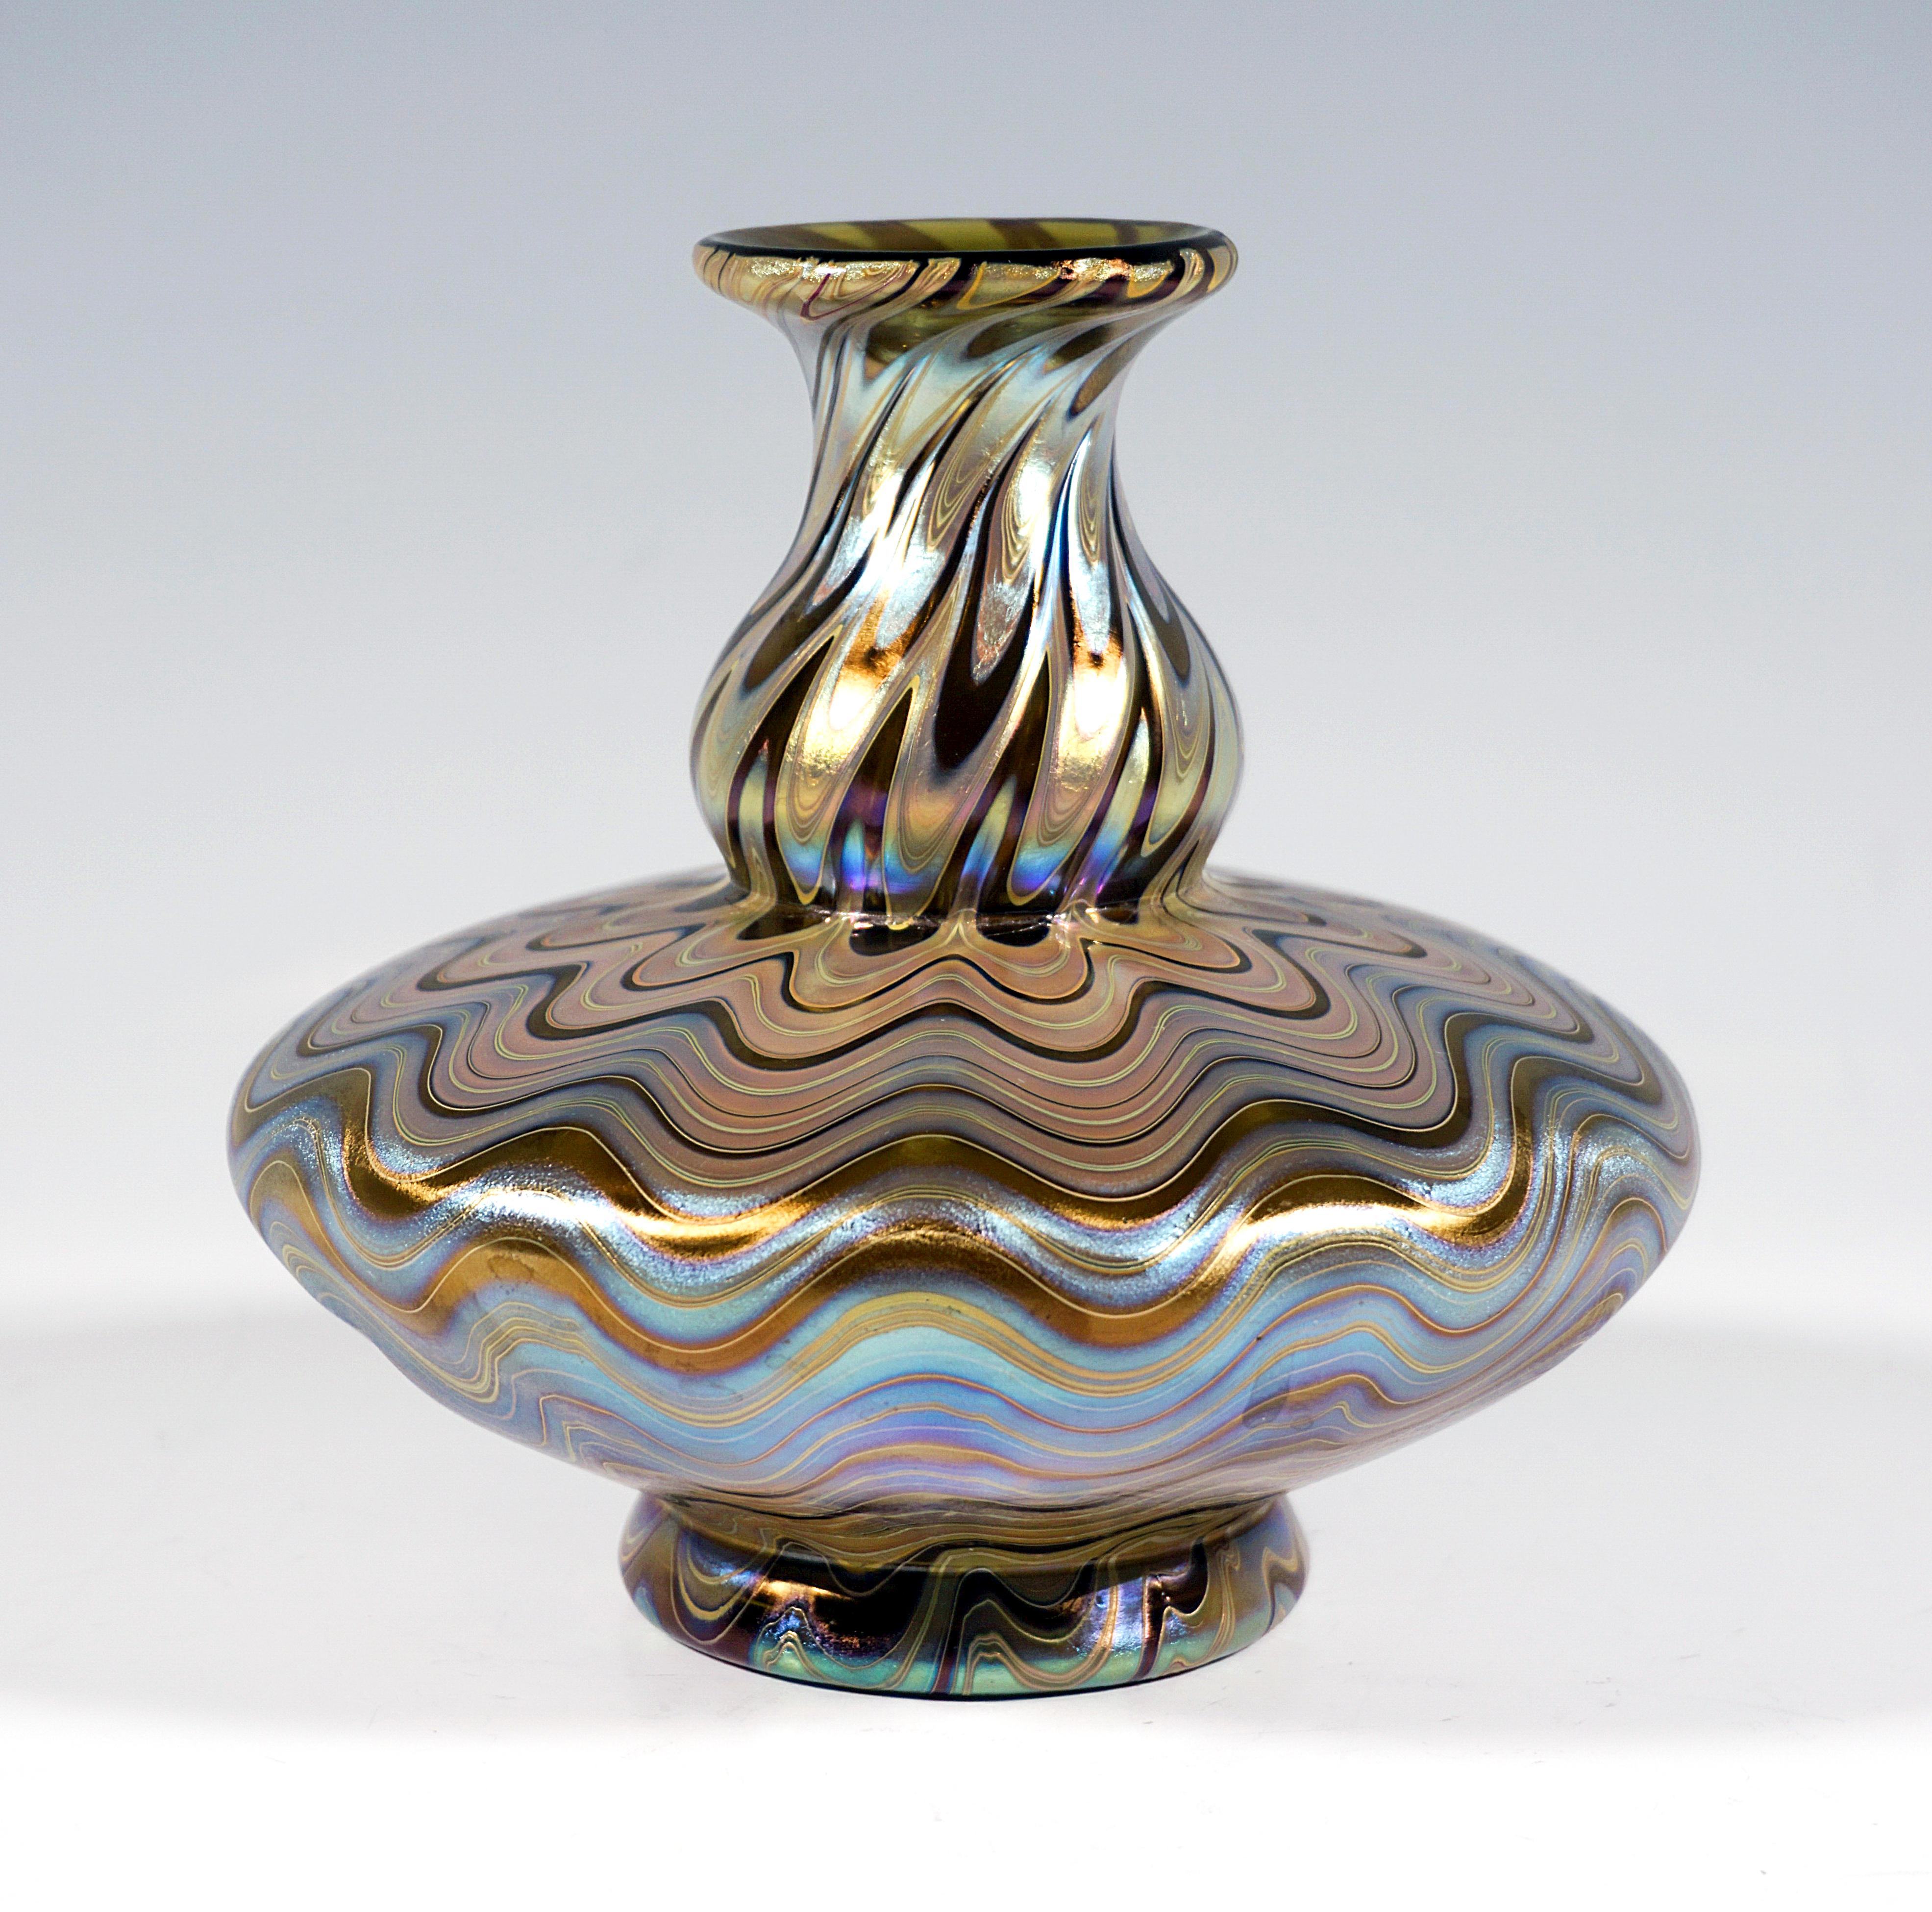 Finest Bohemian Art Nouveau Glass Vase:
Blown into form baluster-shaped body with discus-shaped protruding belly part, attached spherical curved neck with flared mouth rim, stepped flush stand with cut out polished pontil, ground signature 'Loetz